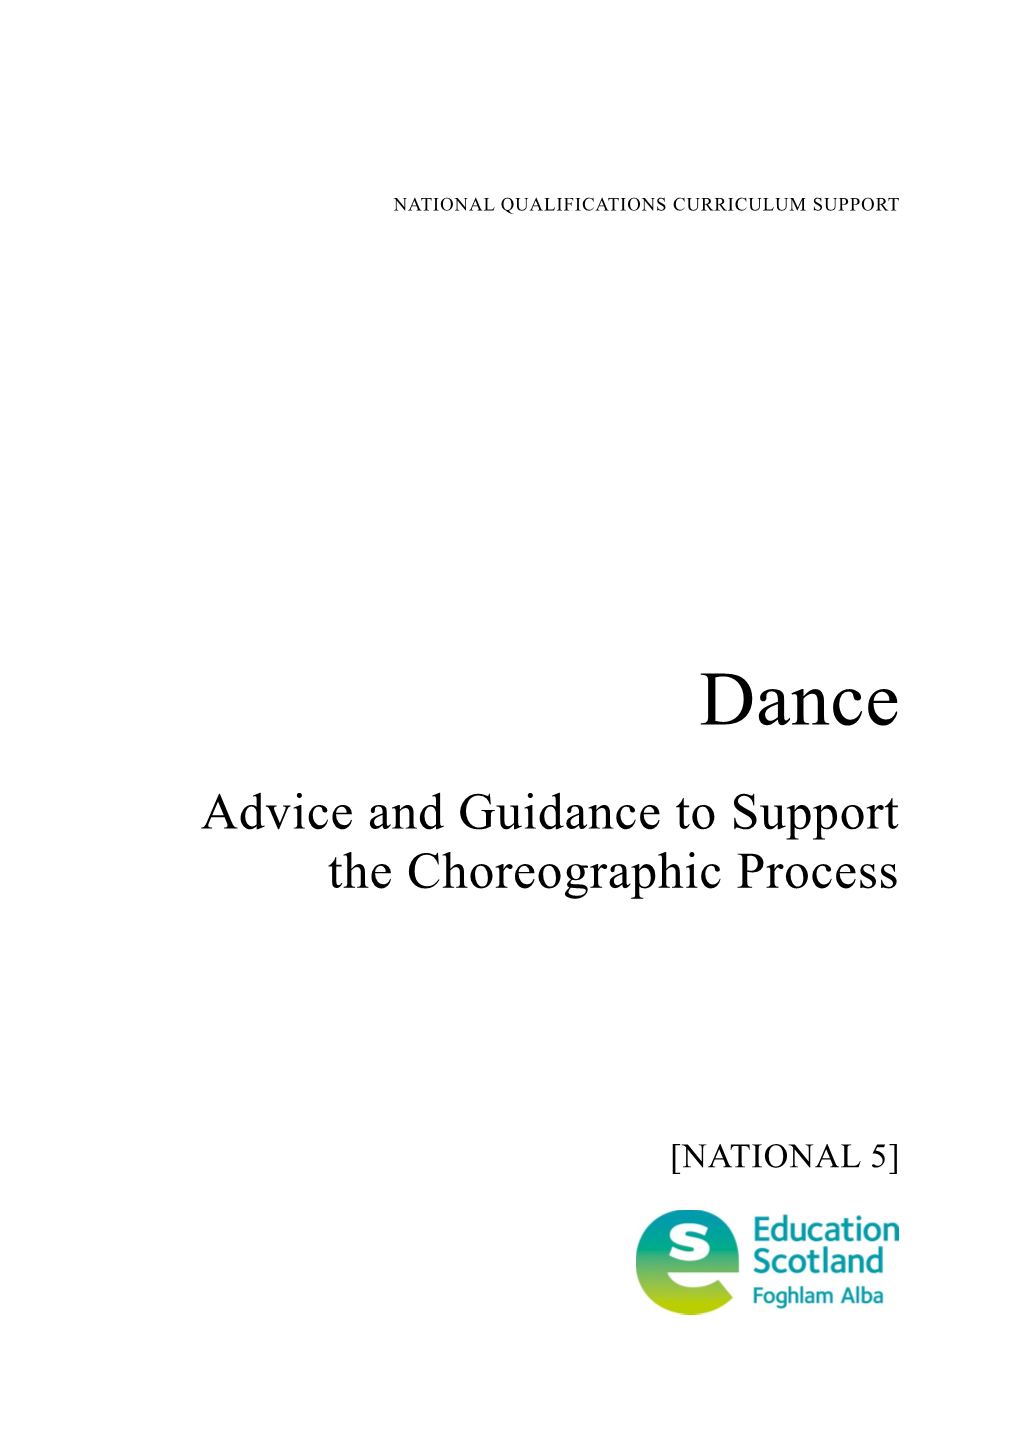 Dance: Advice and Guidance to Support the Choreographic Process